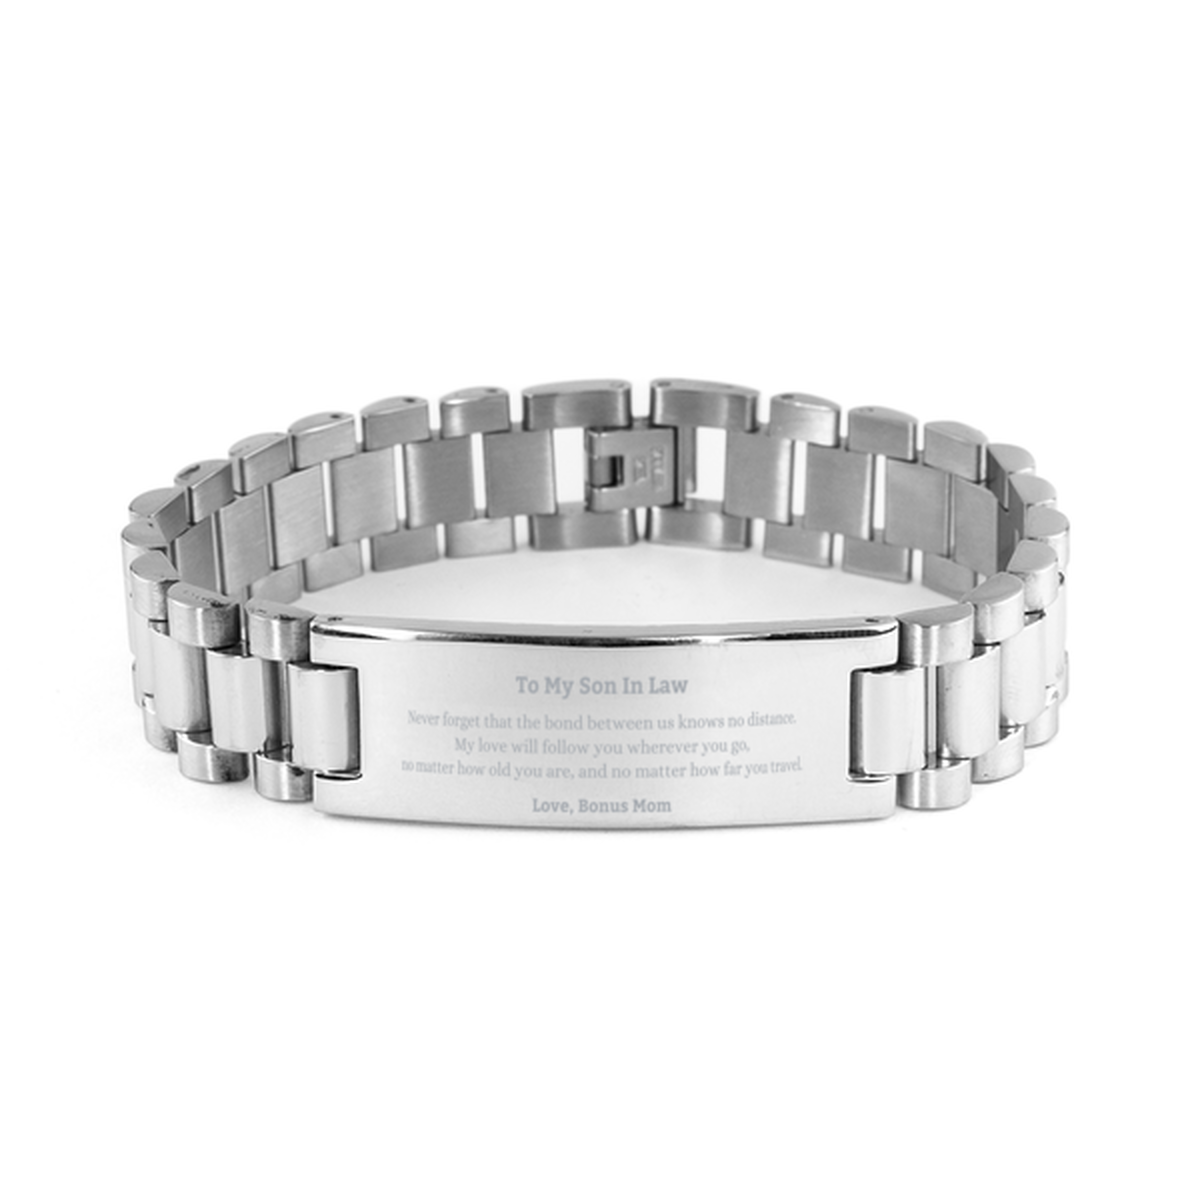 Son In Law Birthday Gifts from Bonus Mom, Adjustable Ladder Stainless Steel Bracelet for Son In Law Christmas Graduation Unique Gifts Son In Law Never forget that the bond between us knows no distance. Love, Bonus Mom